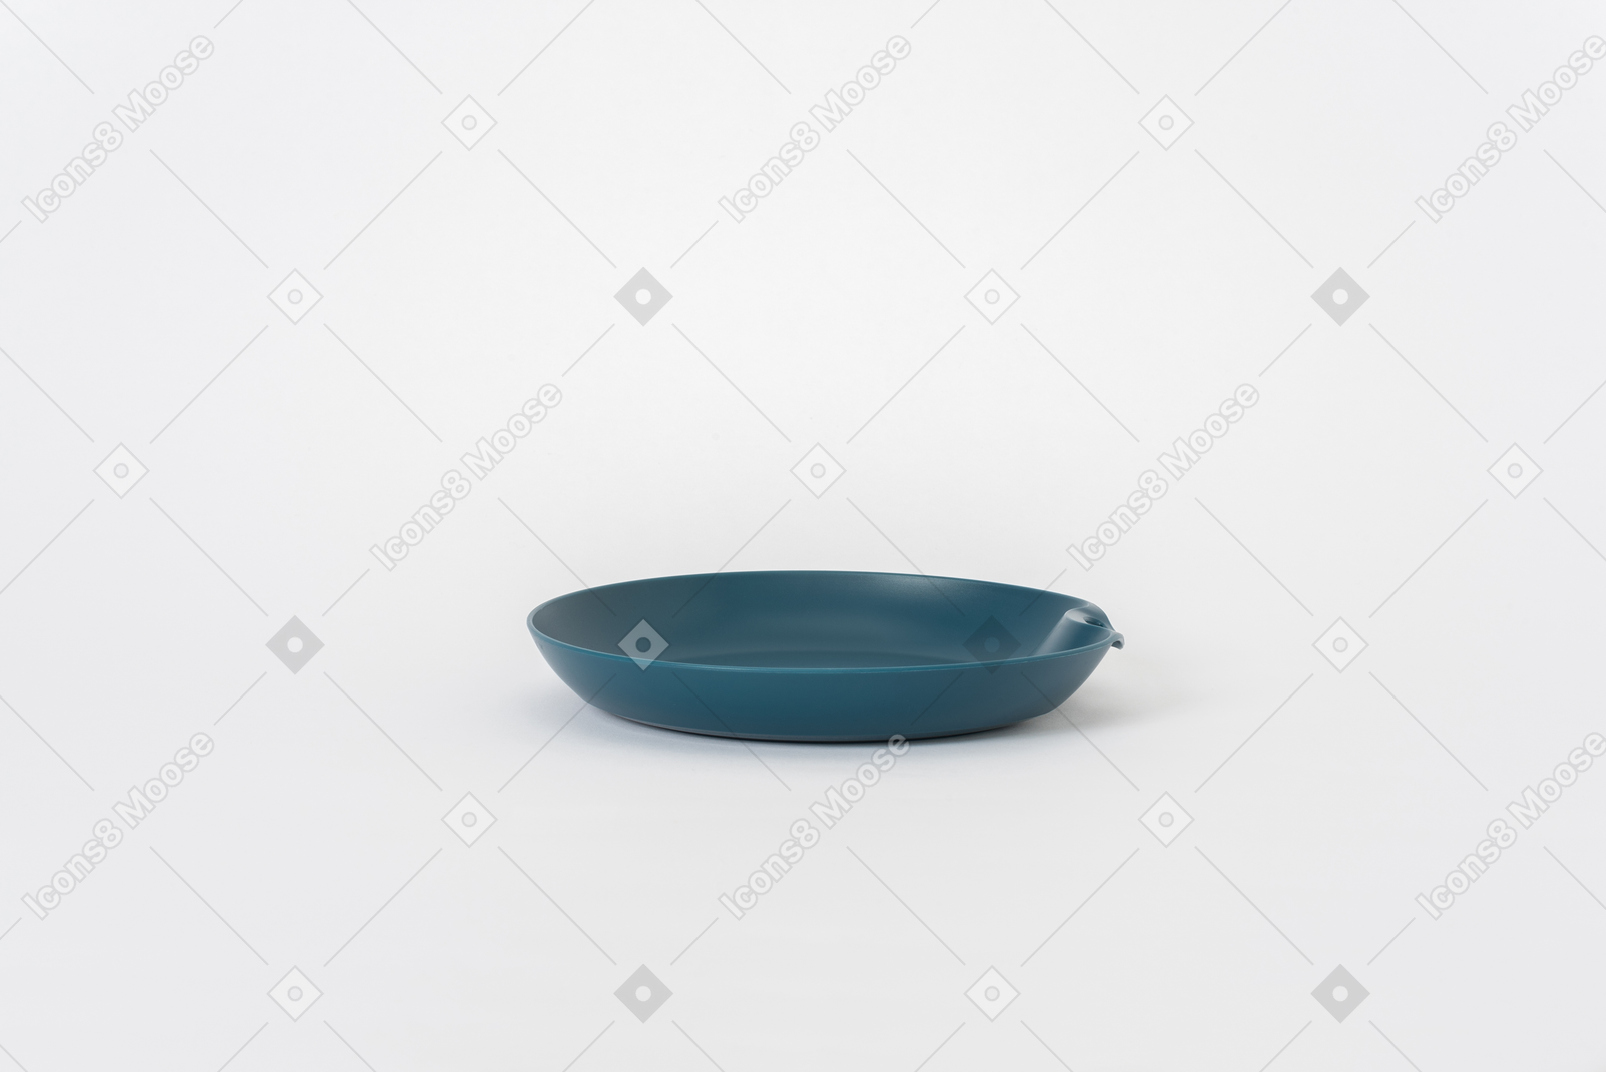 Plastic black plate on a white background